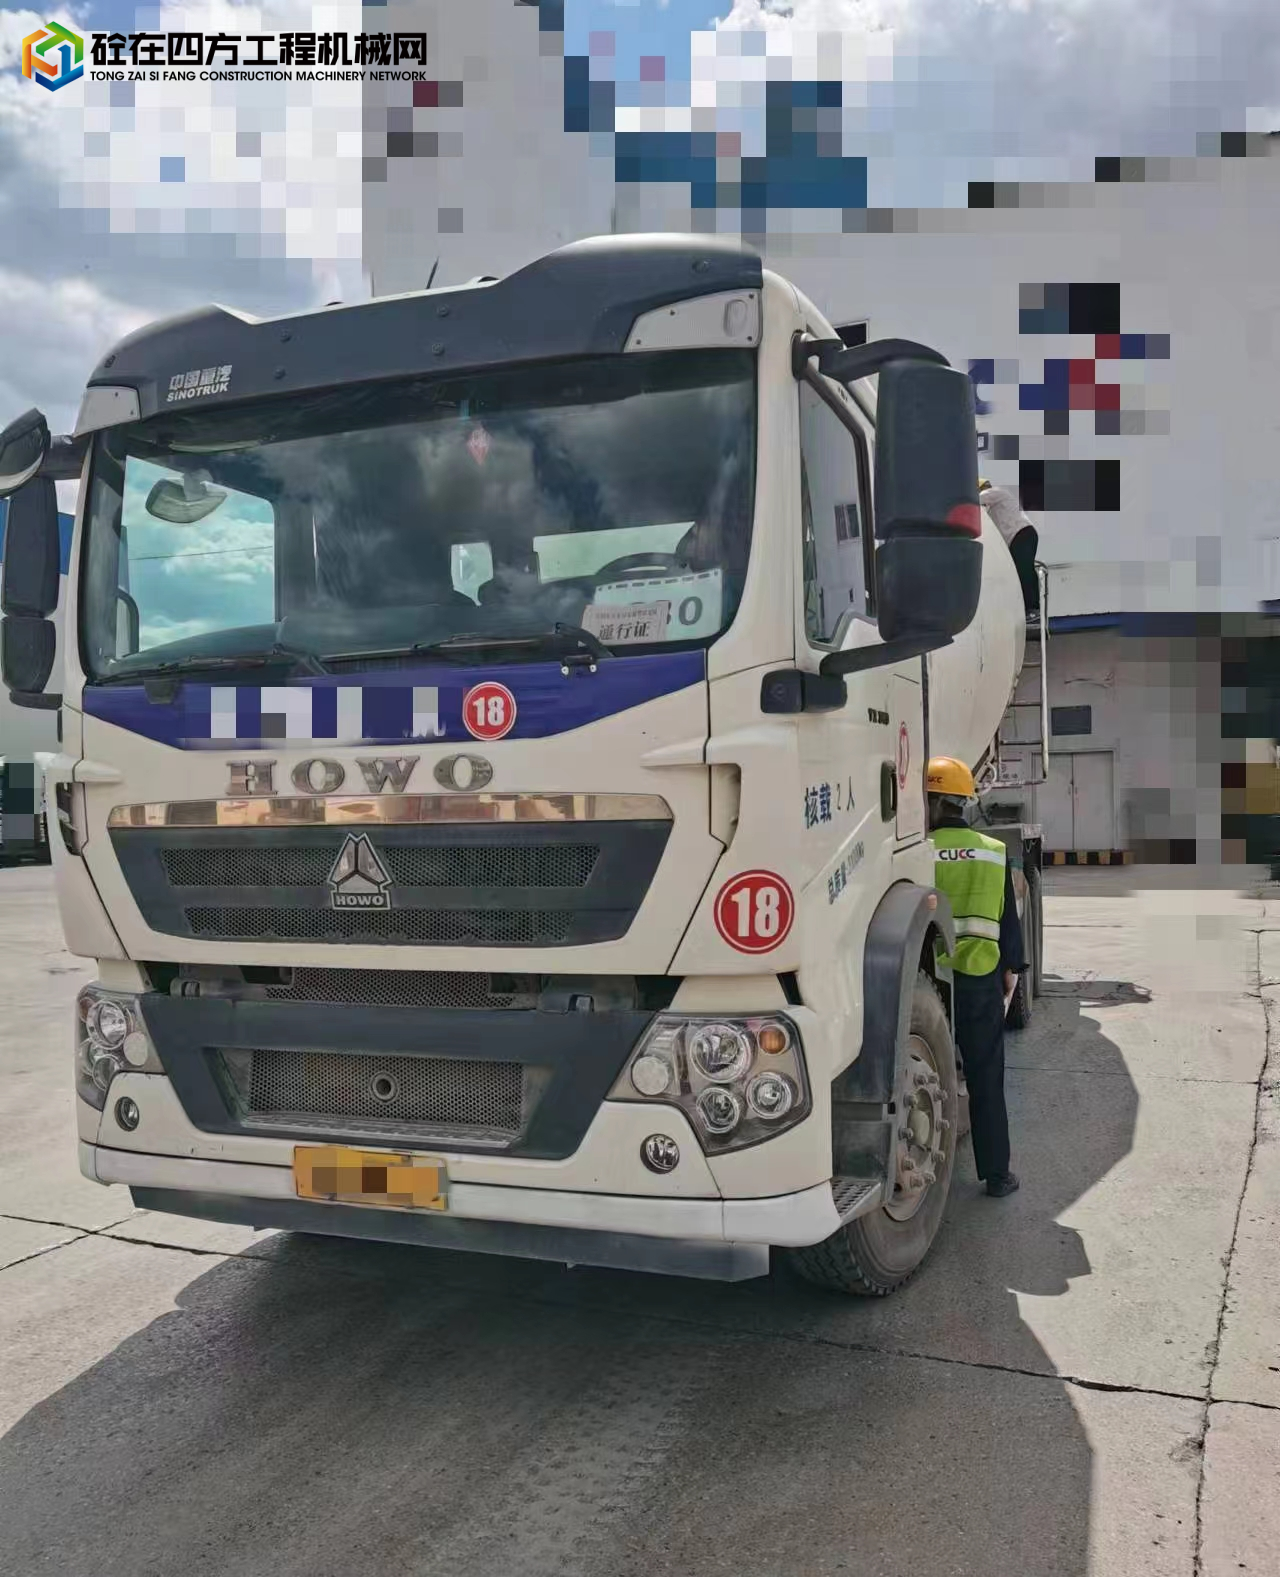 https://images.tongzsf.com/tong/truck_machine/20231201/165697fe70adc8.jpg